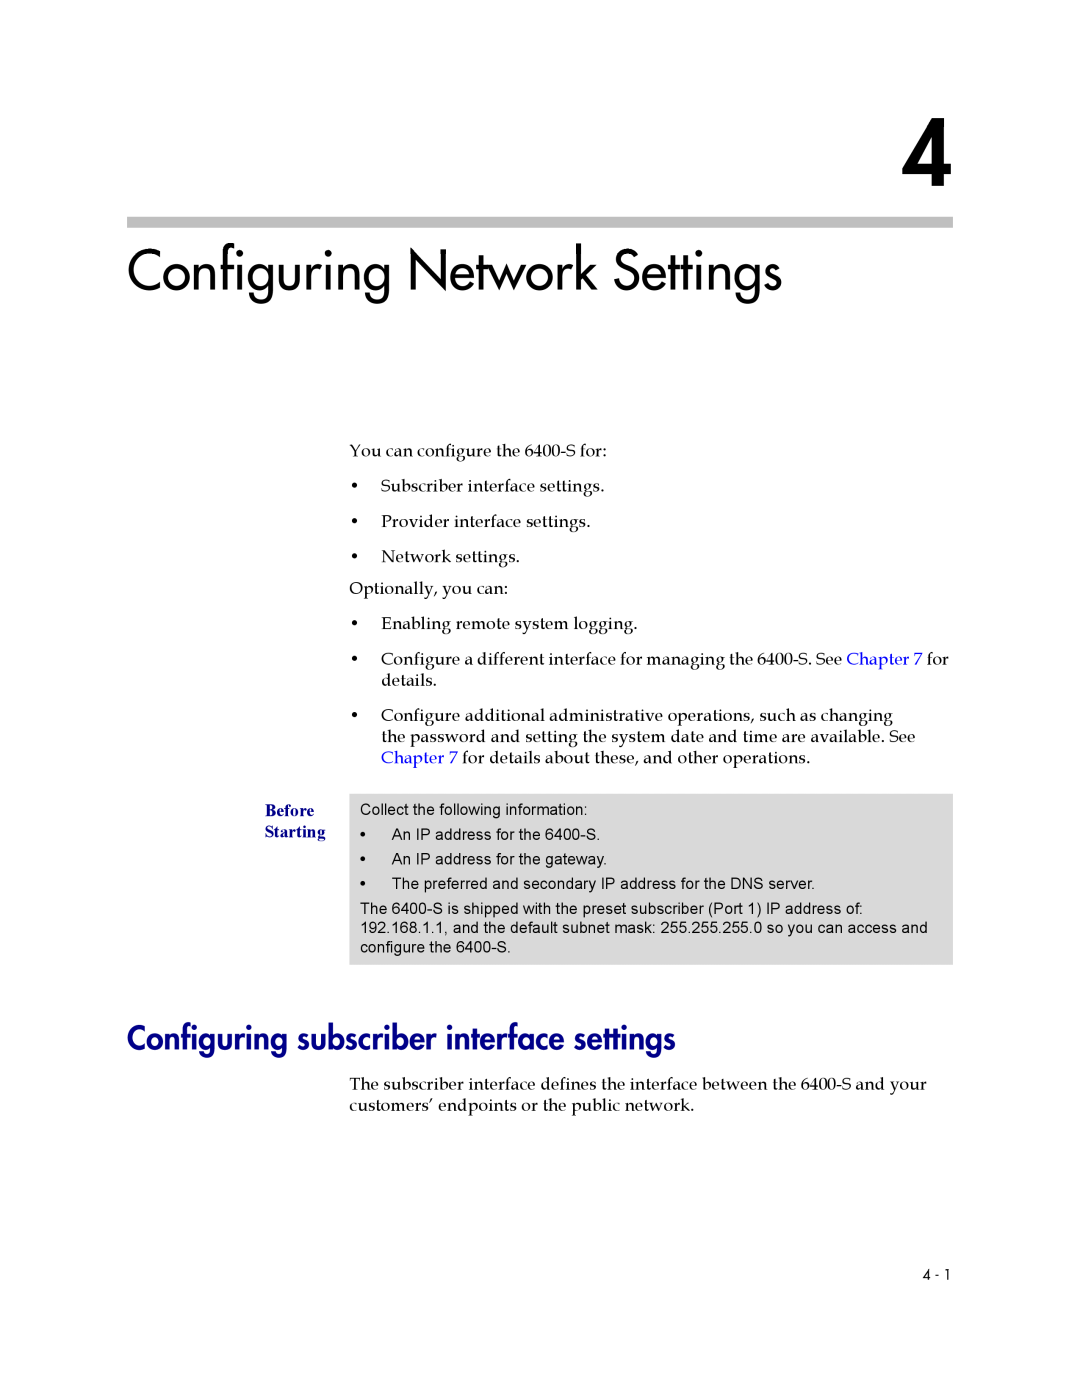 Polycom 6400-S manual Configuring Network Settings, Configuring subscriber interface settings, Before Starting 